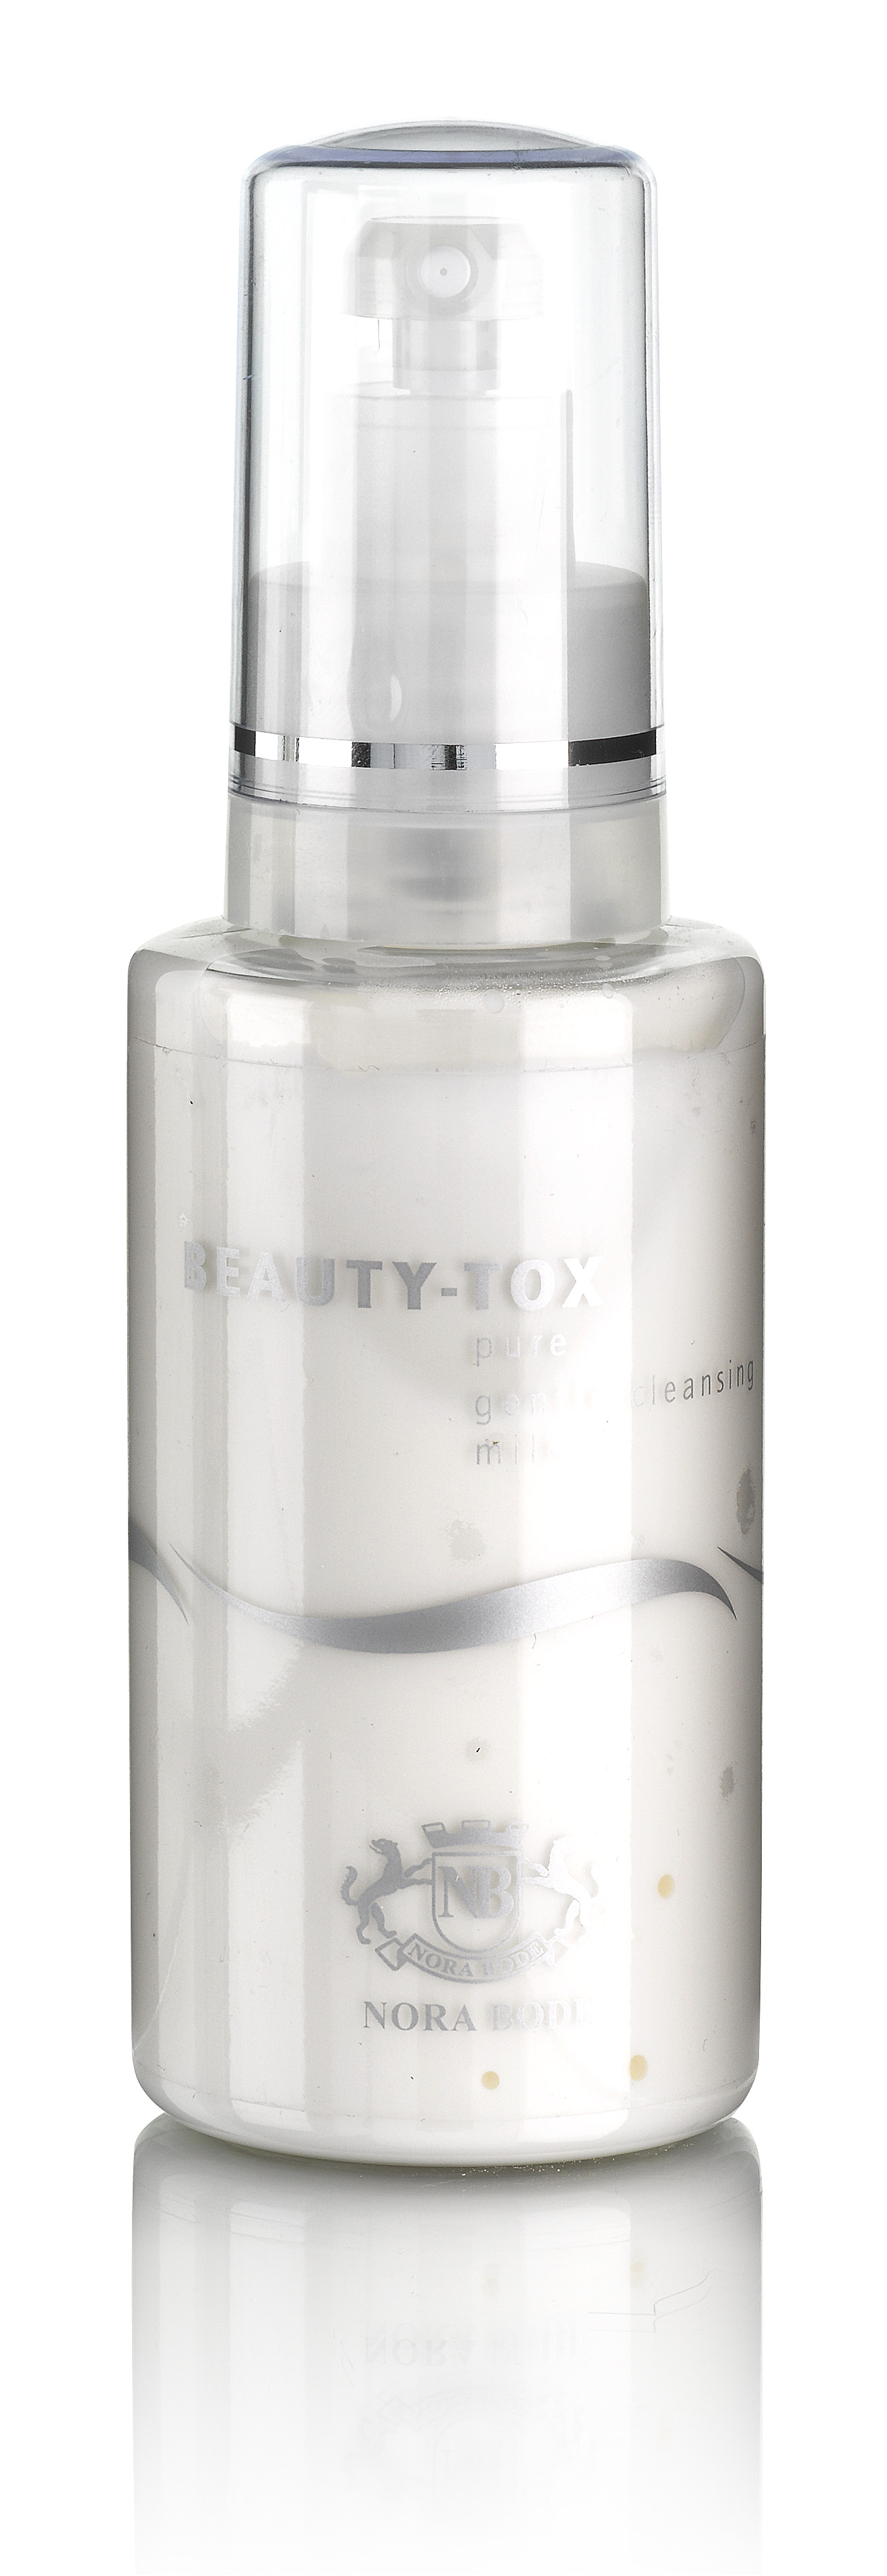 Beauty-Tox_Pure gentle cleansing milk